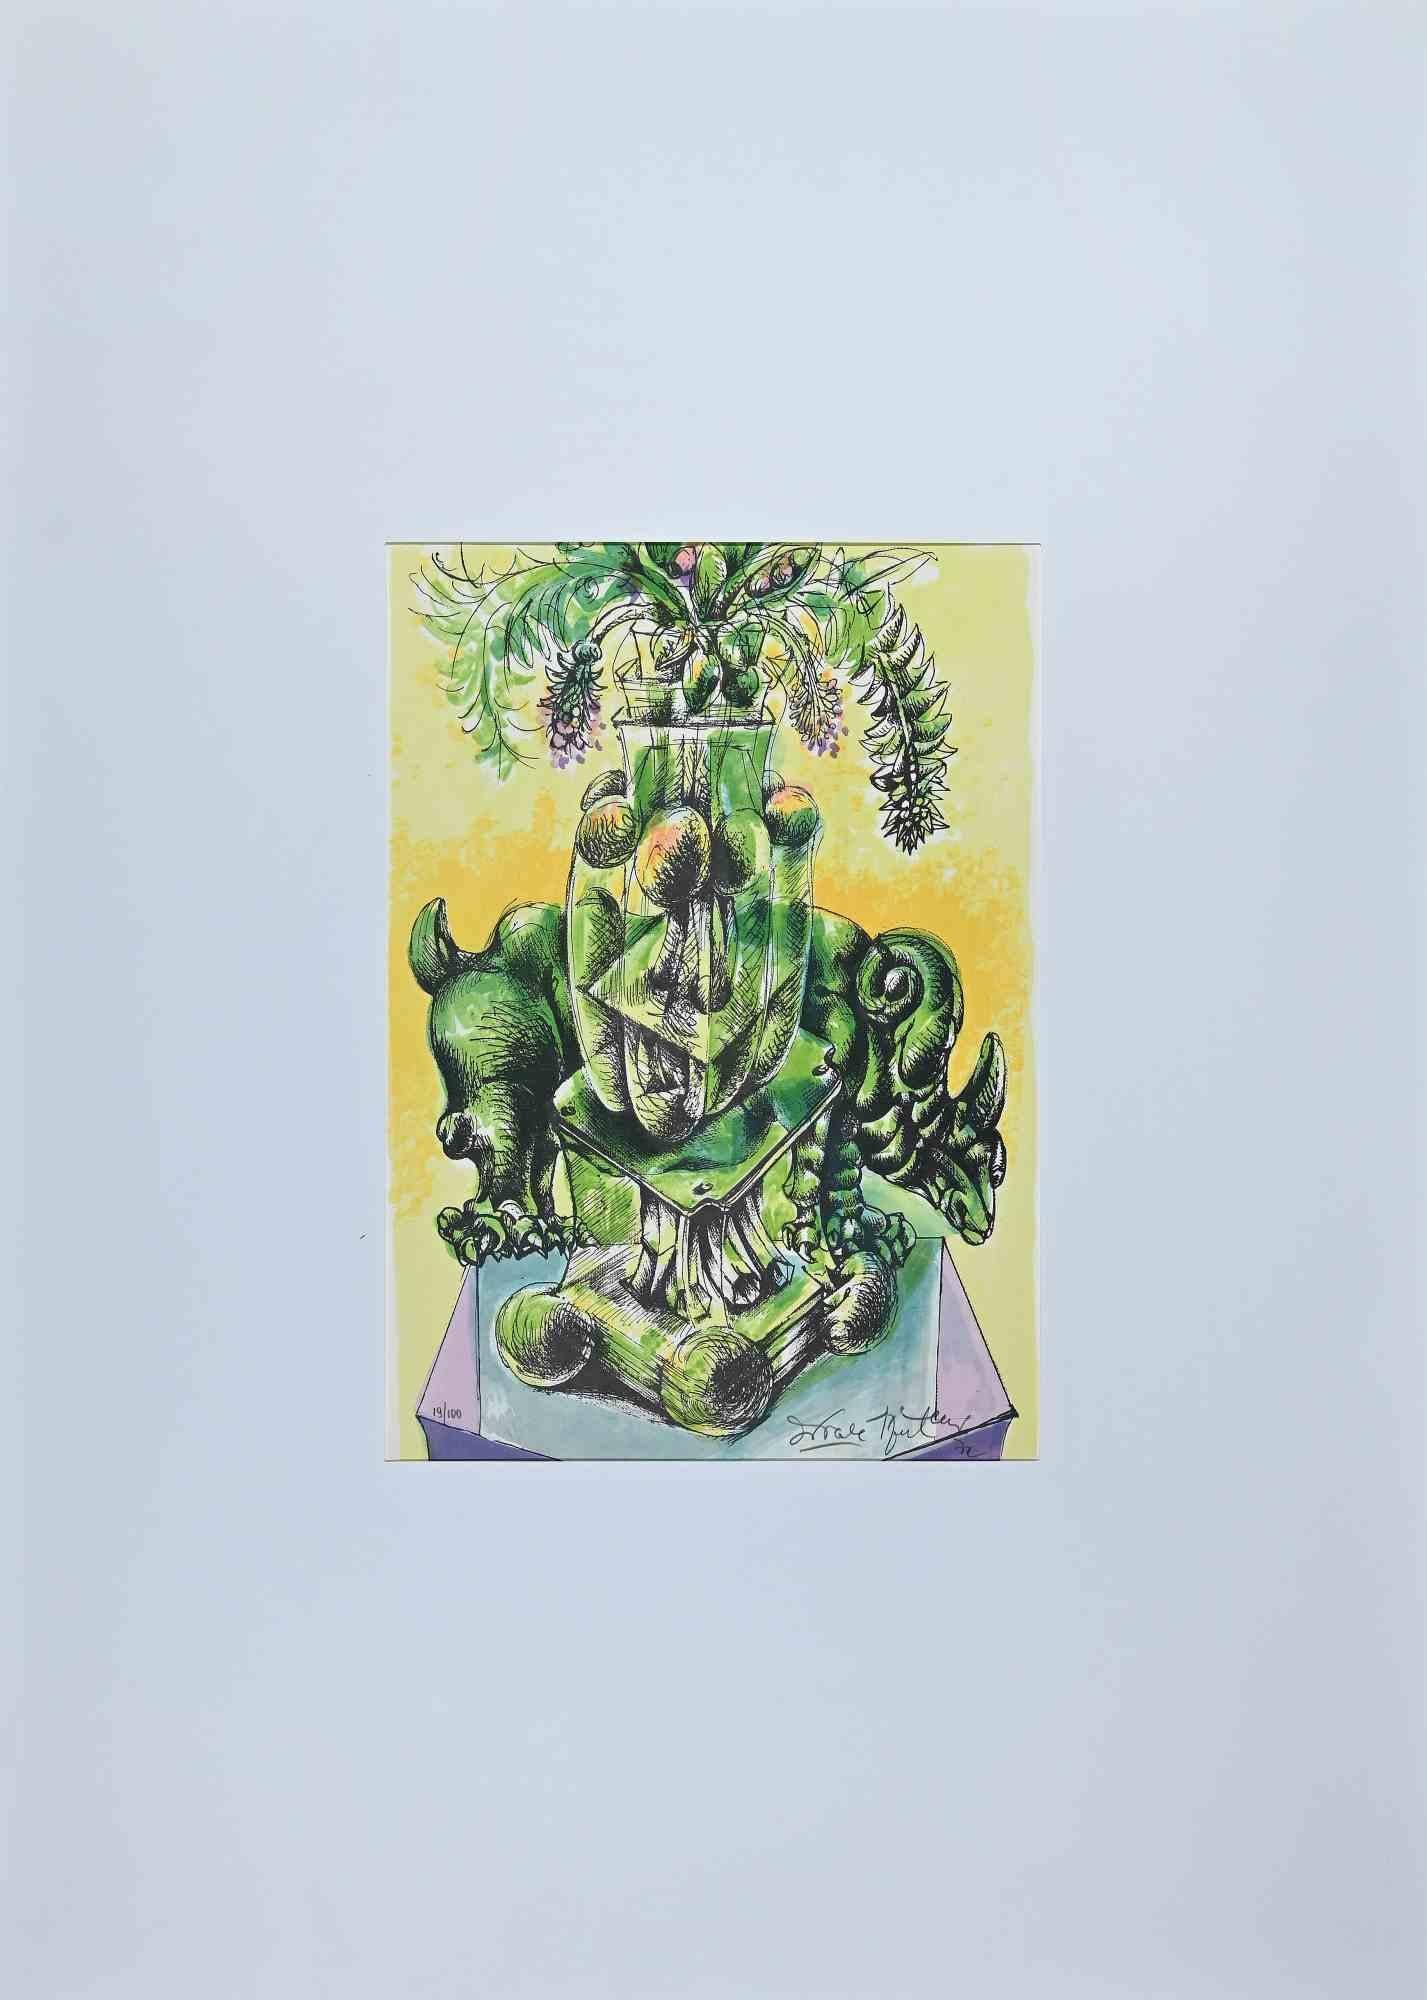 The Vase is an original artwork realized by Ercole Pignatelli in 1971. Colored lithograph.

Hand-signed  by the artist in pencil on the lower right., Numbered. Edition of 100. The artwork is printed by "la nuova foglio s.p.a., label on the back.